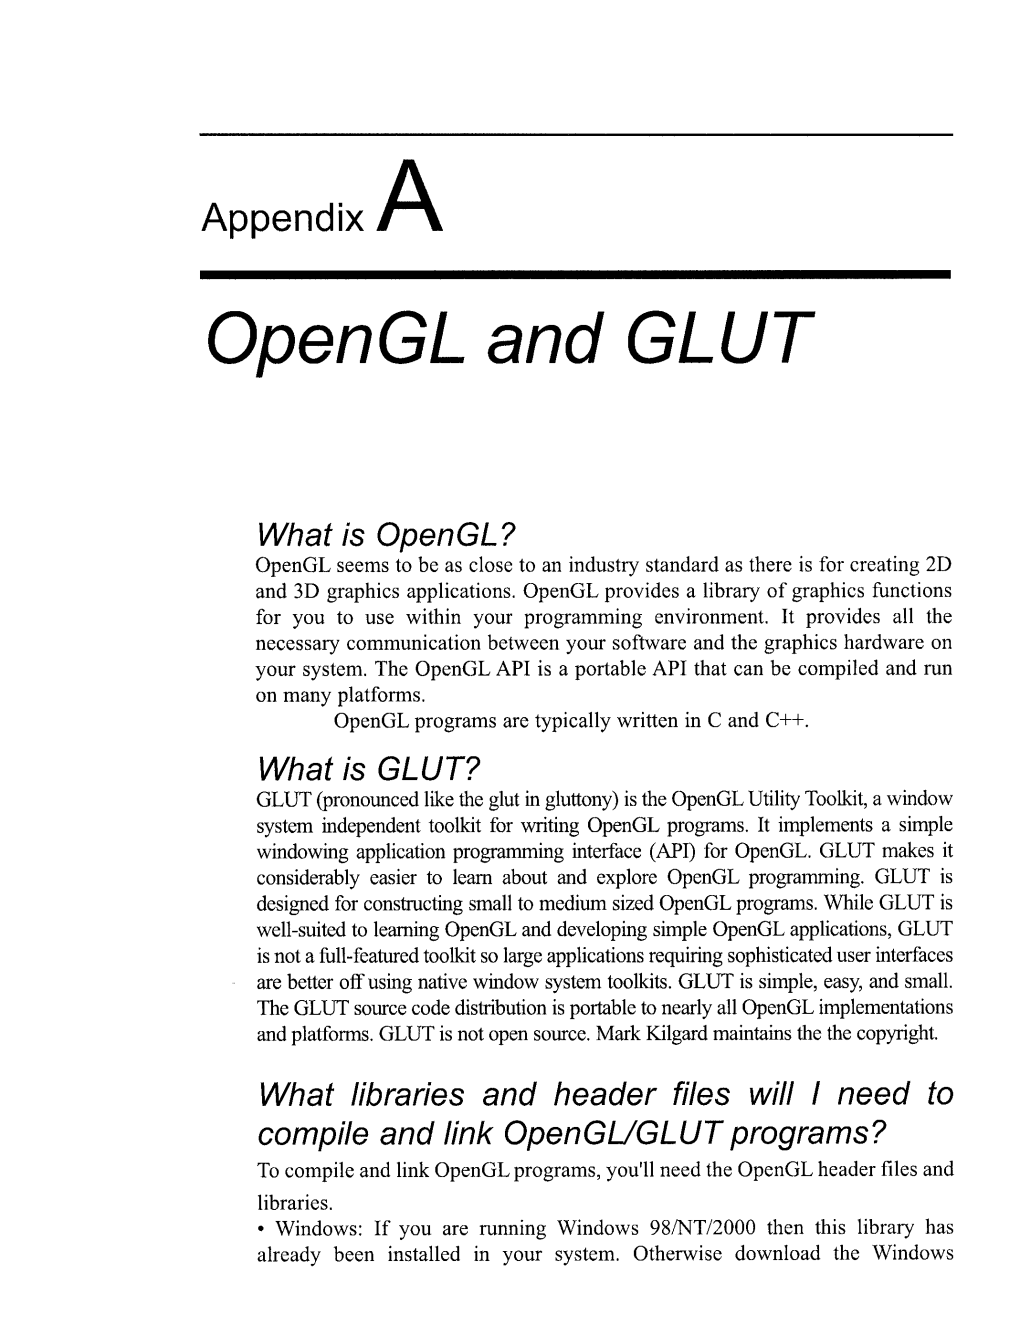 Opengl and GLUT